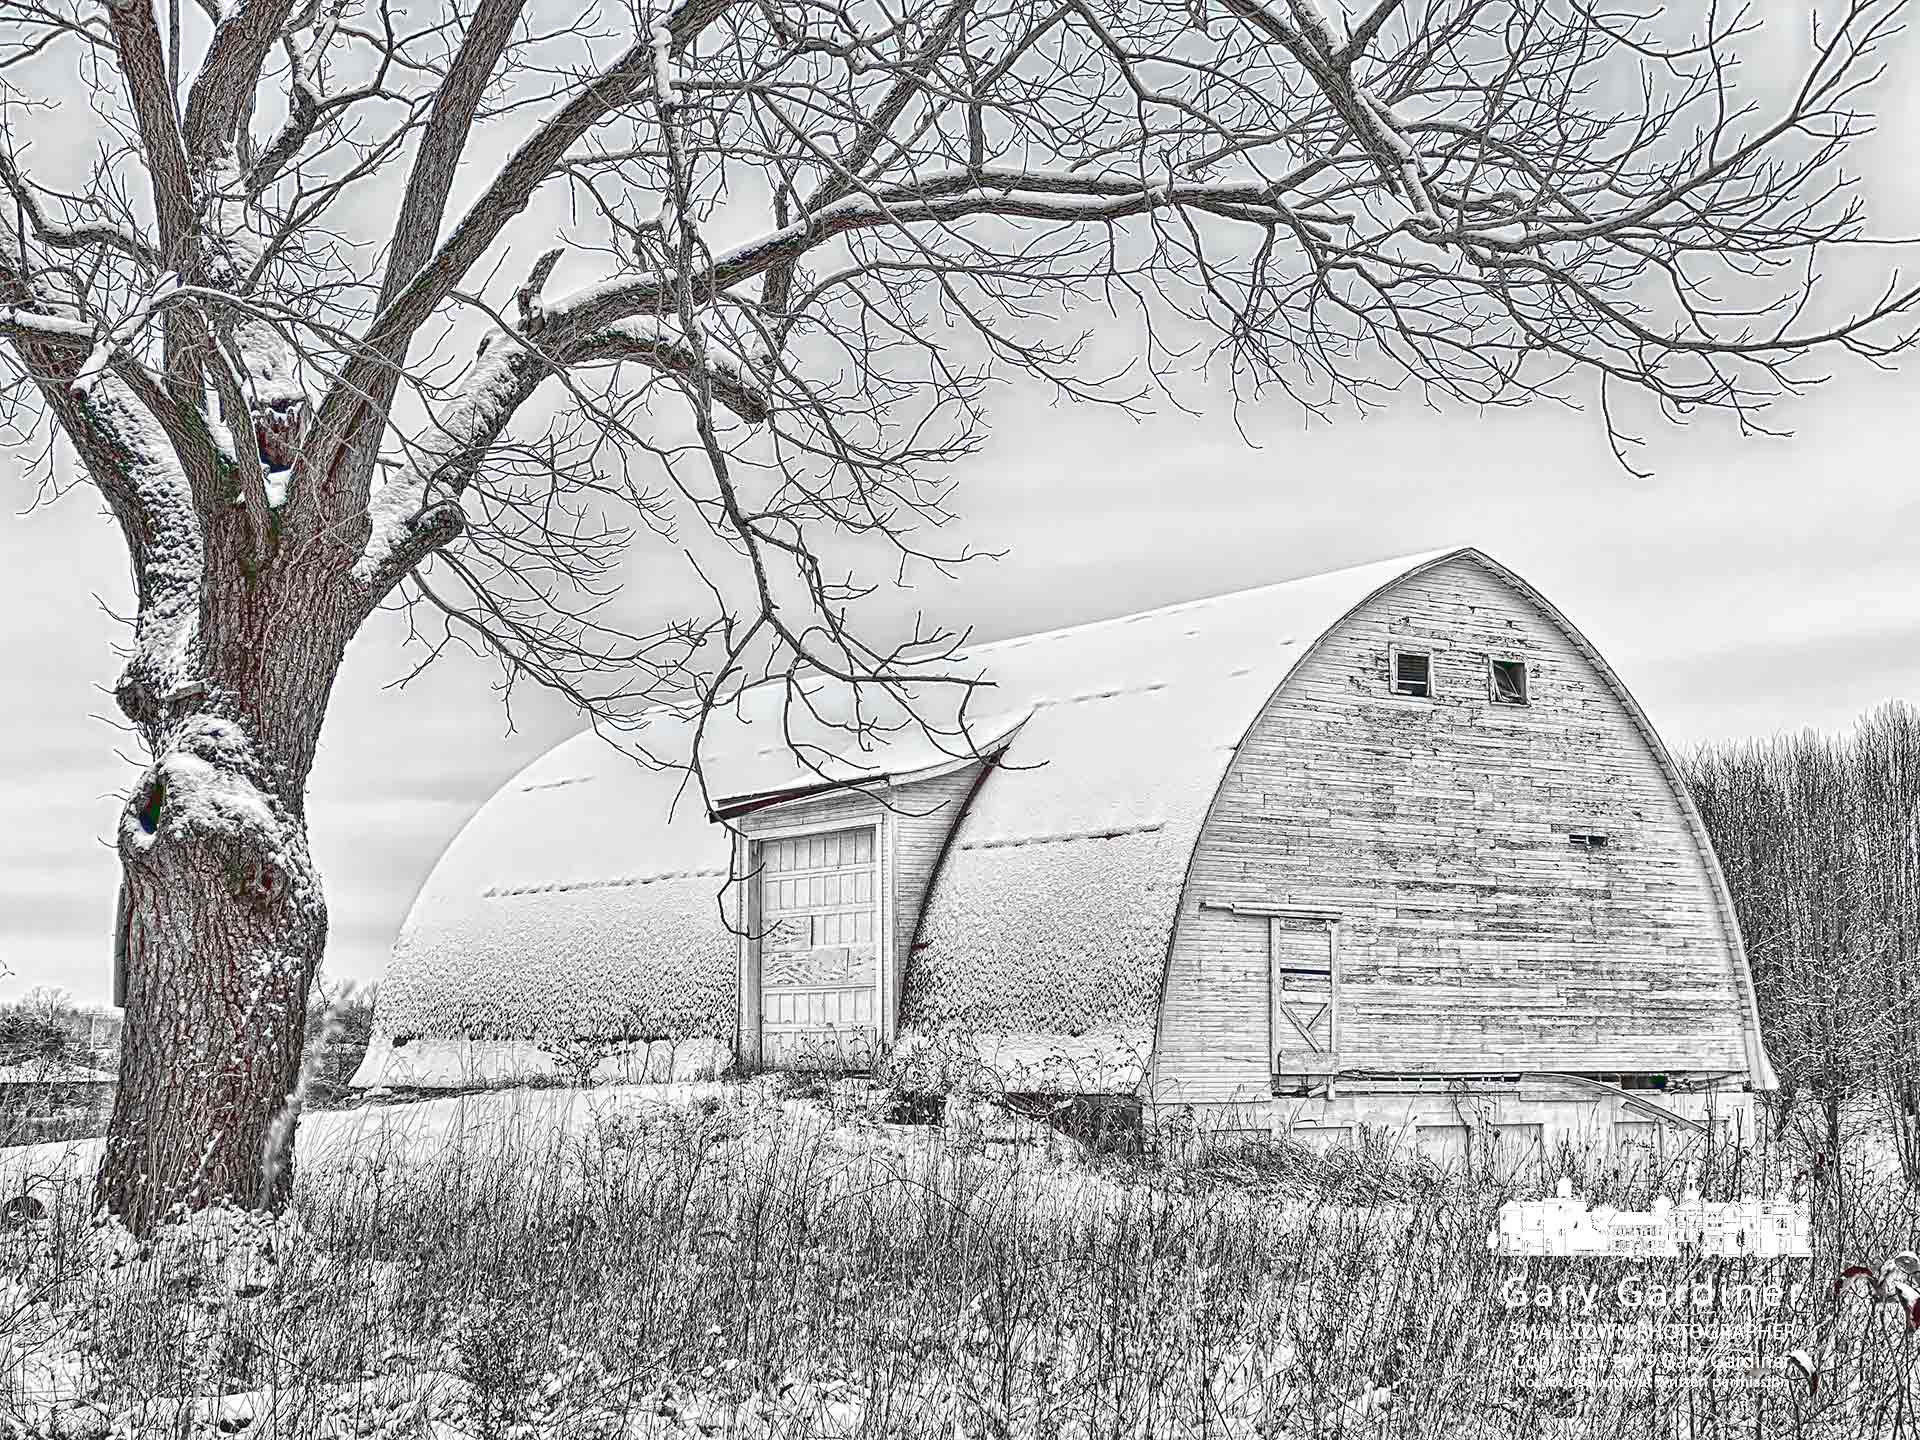 A thin layer of snow blankets the barn and land at the Braun Farm. My Final Photo for Dec. 16, 2019.